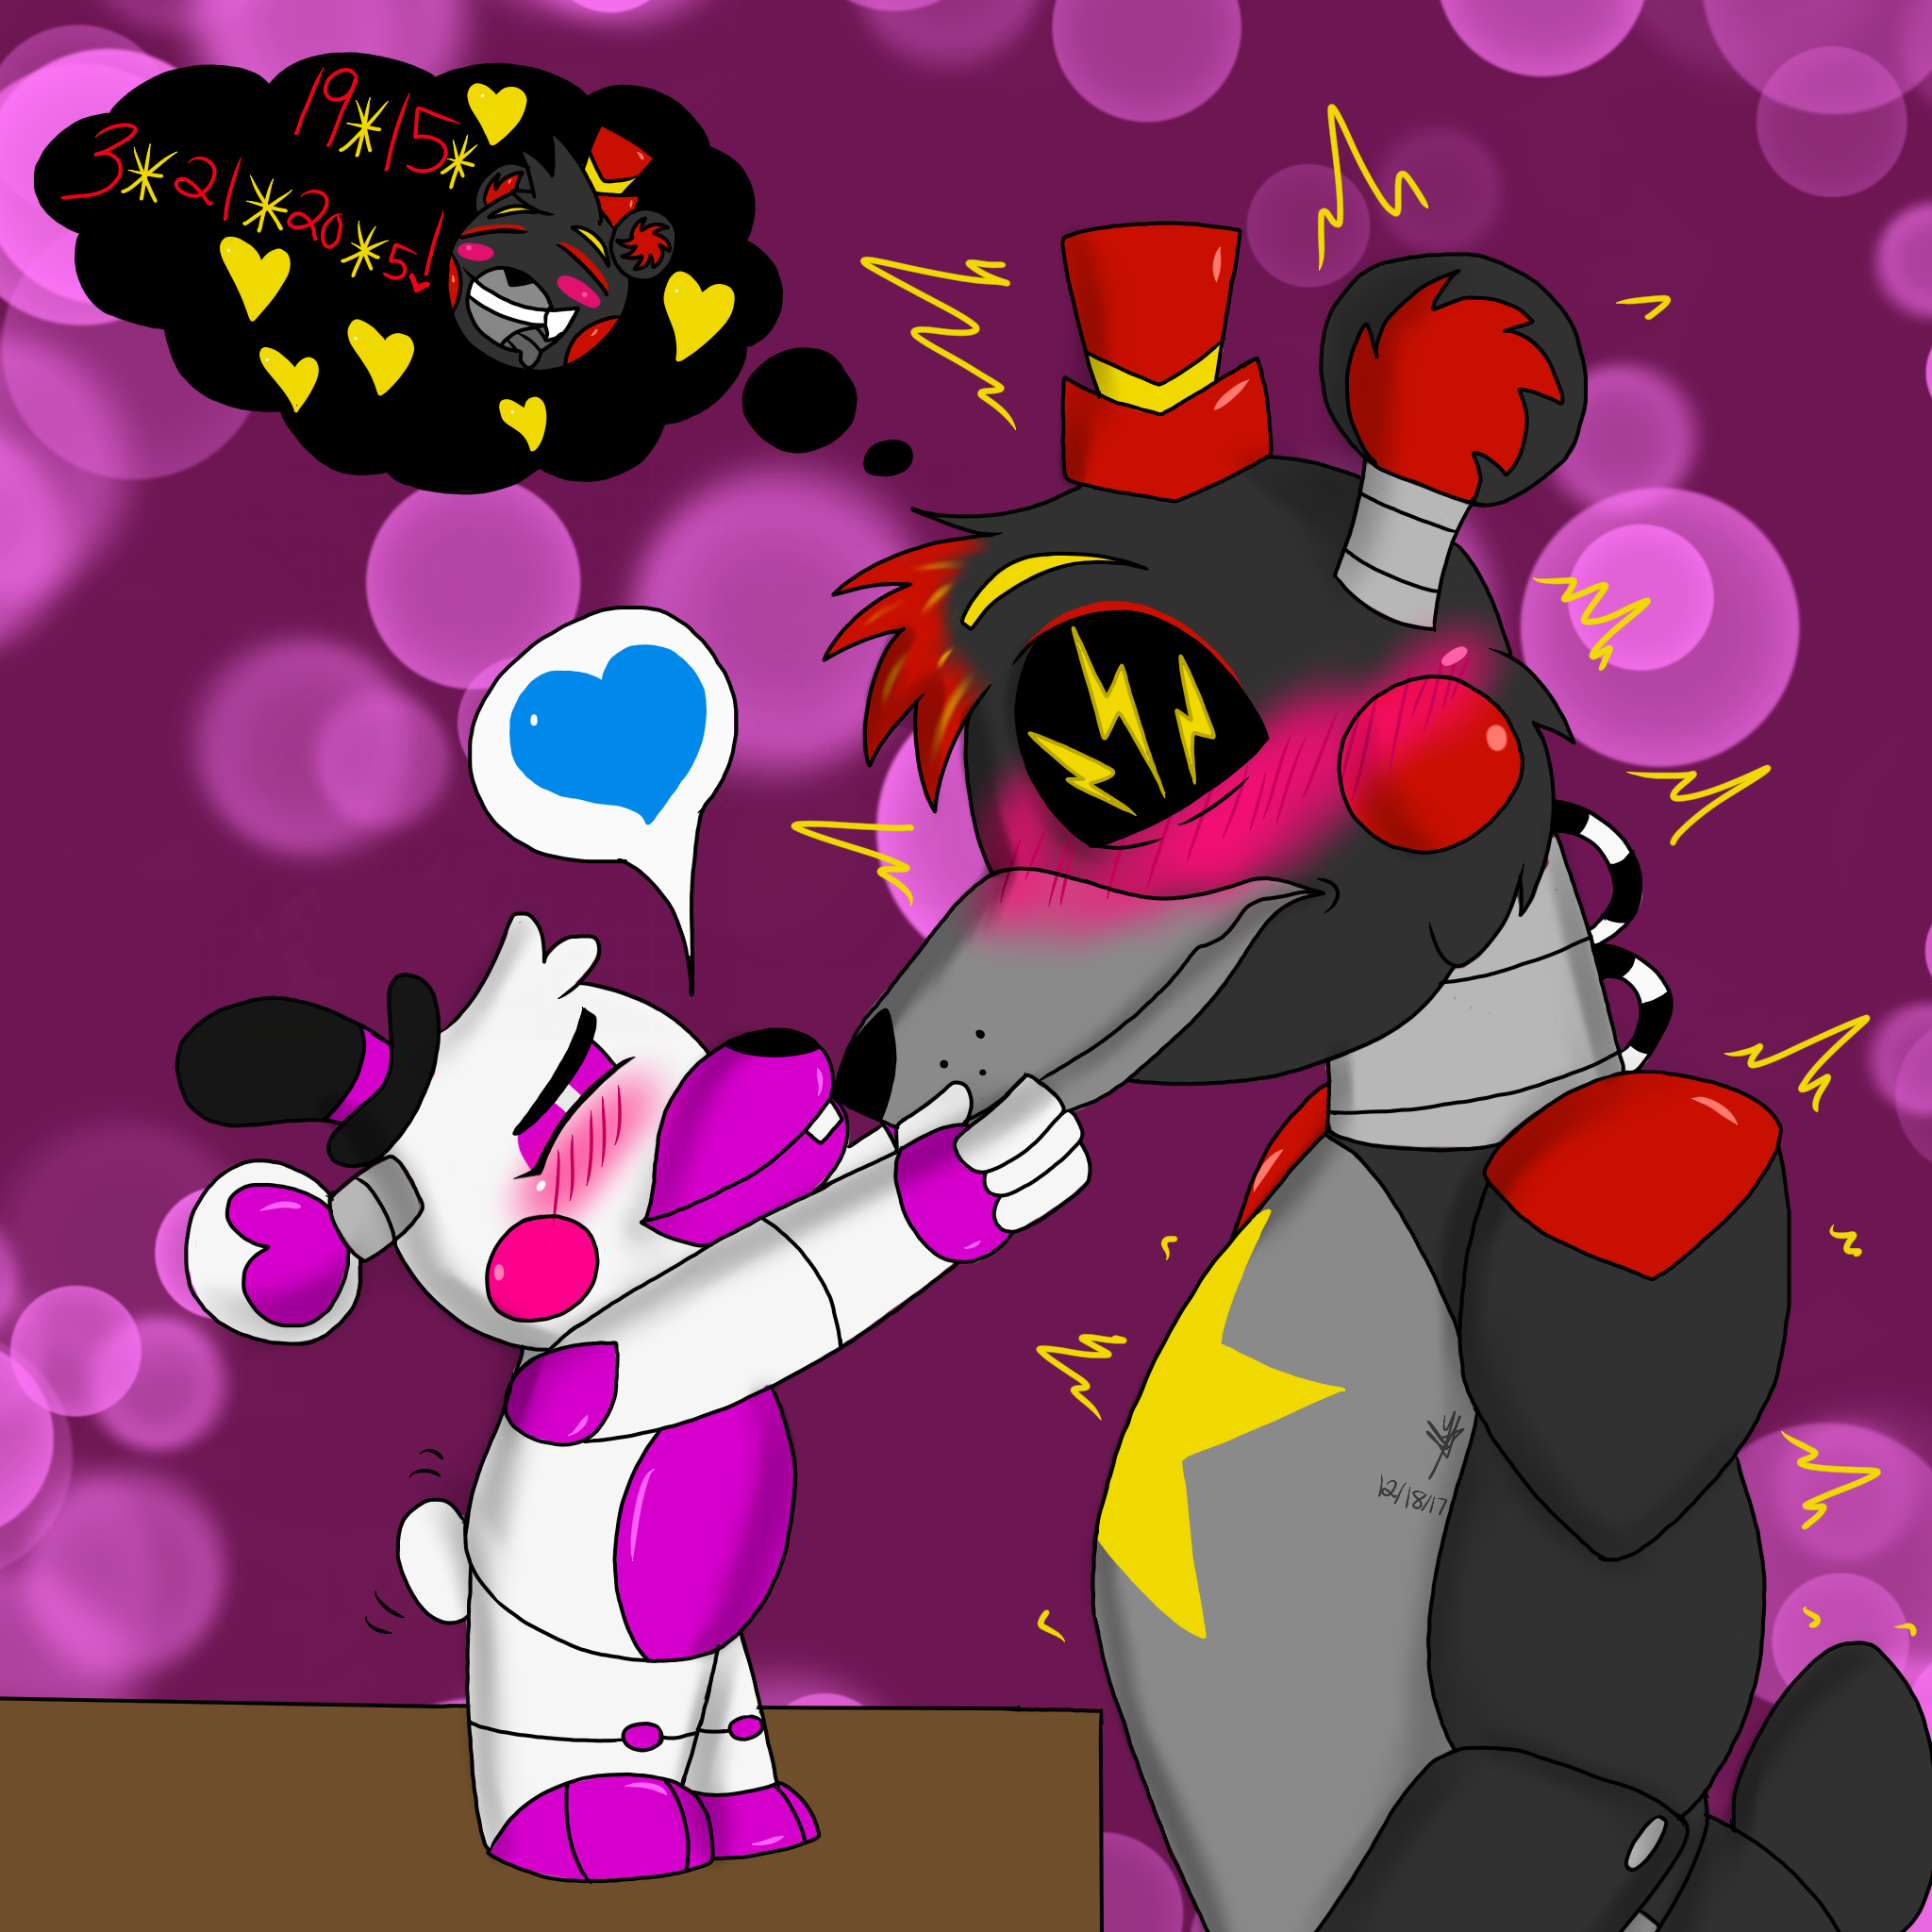 Kisses for You (Helpy X Lefty) by ArtMama113 on DeviantArt.